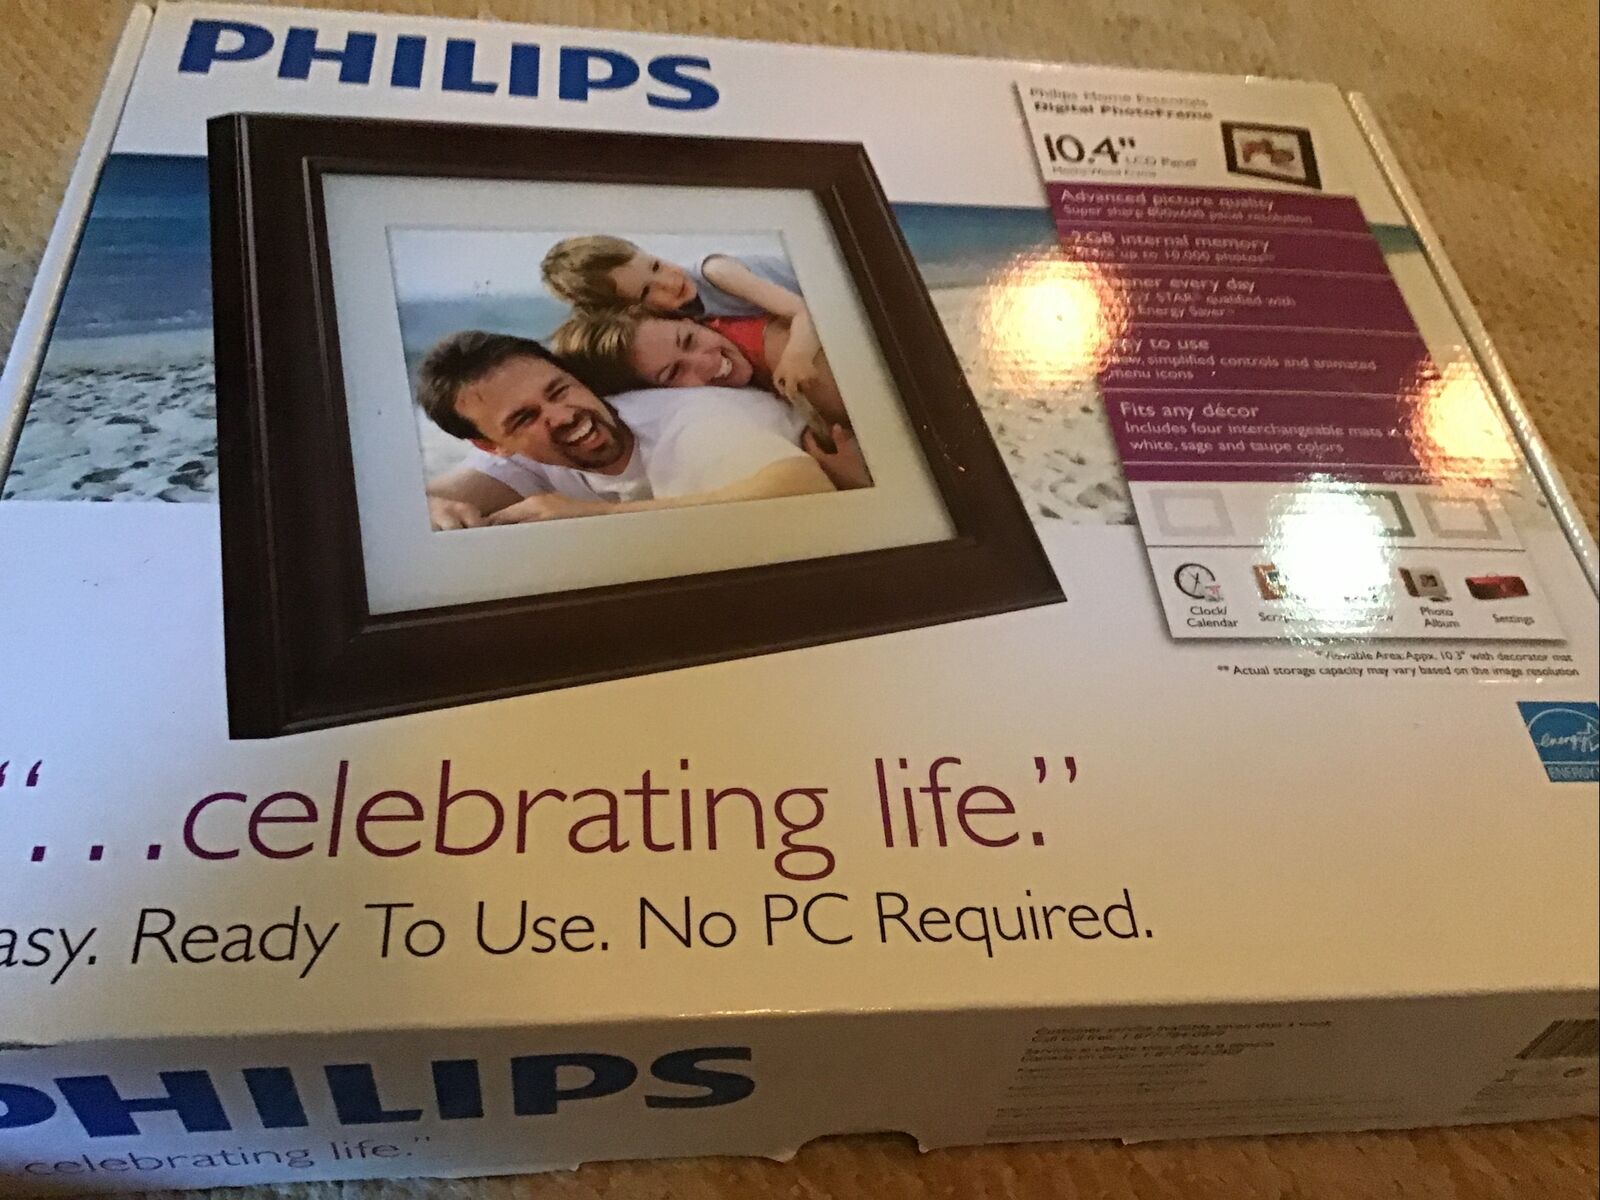 Philips Home Essentials Digital Photoframe 10.4" Lcd Spf3400c/g7 Picture Frame